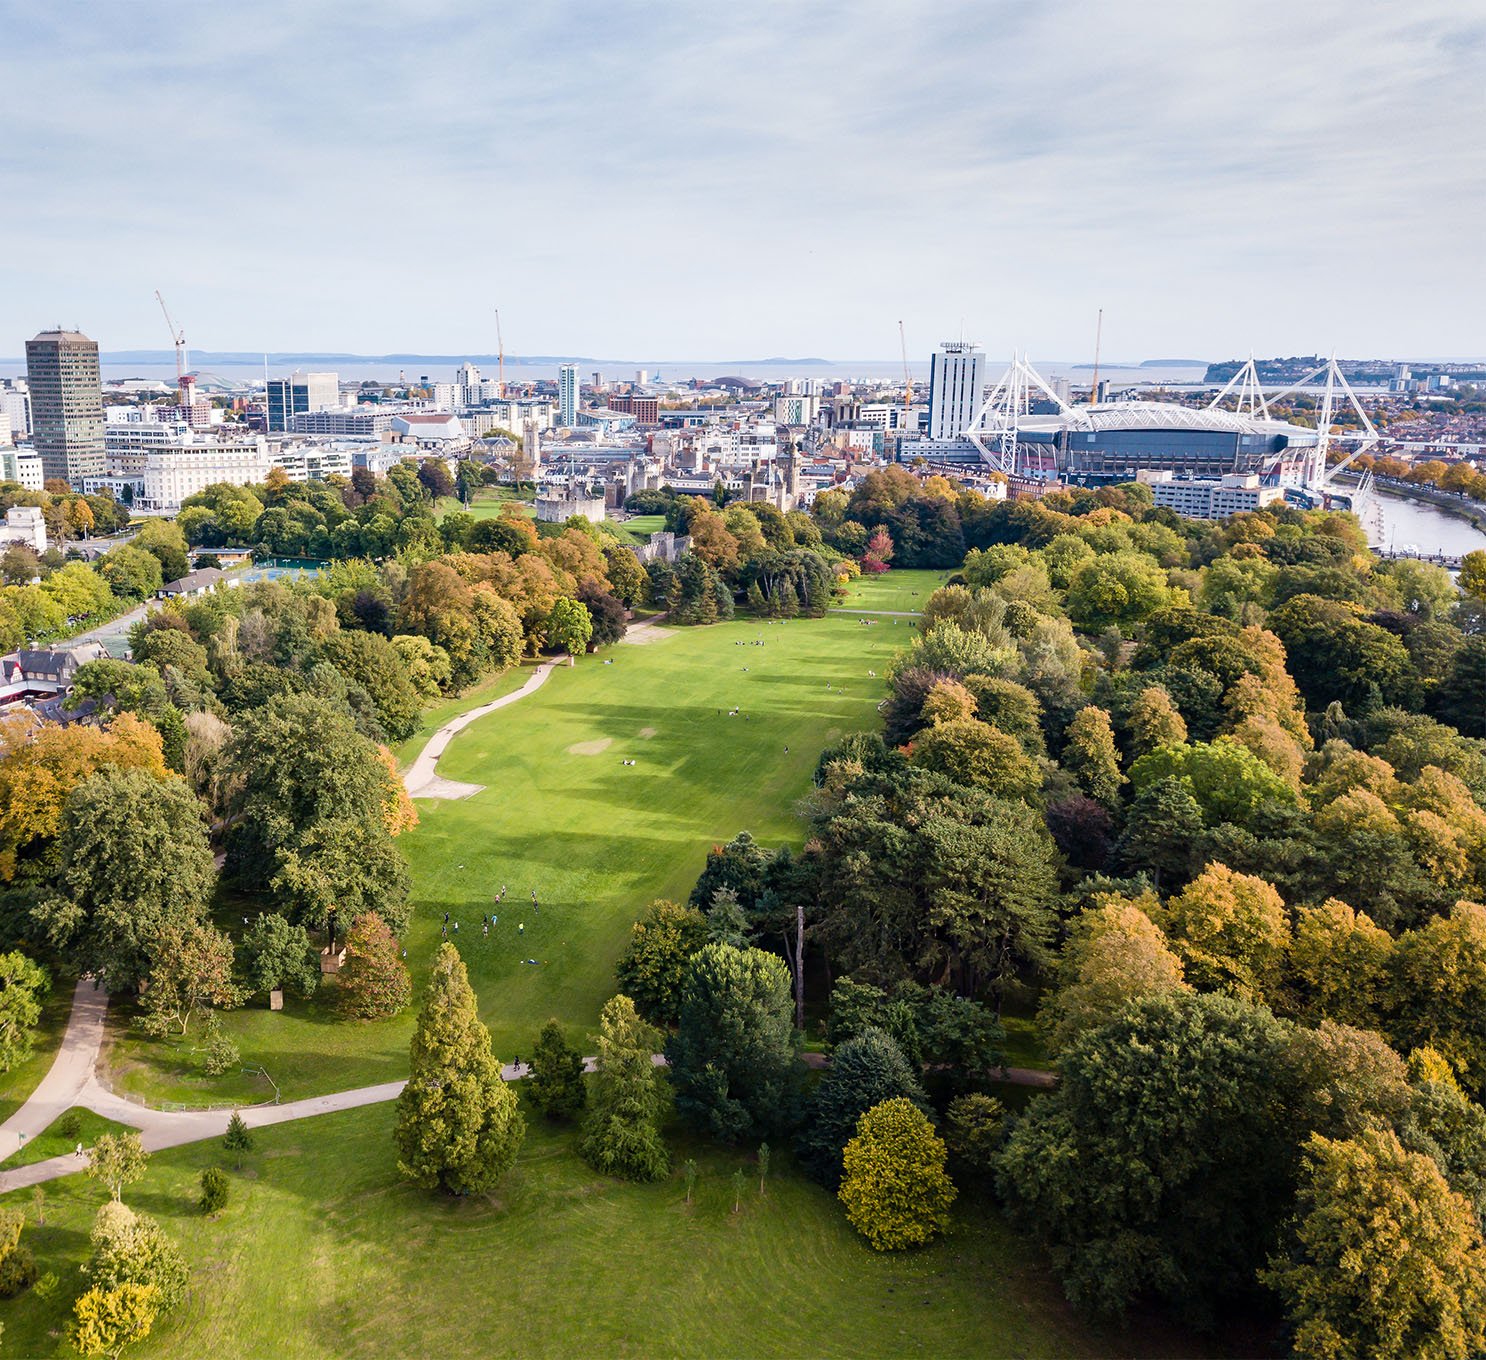 Overlooking Bute Park in Cardiff in the autumn